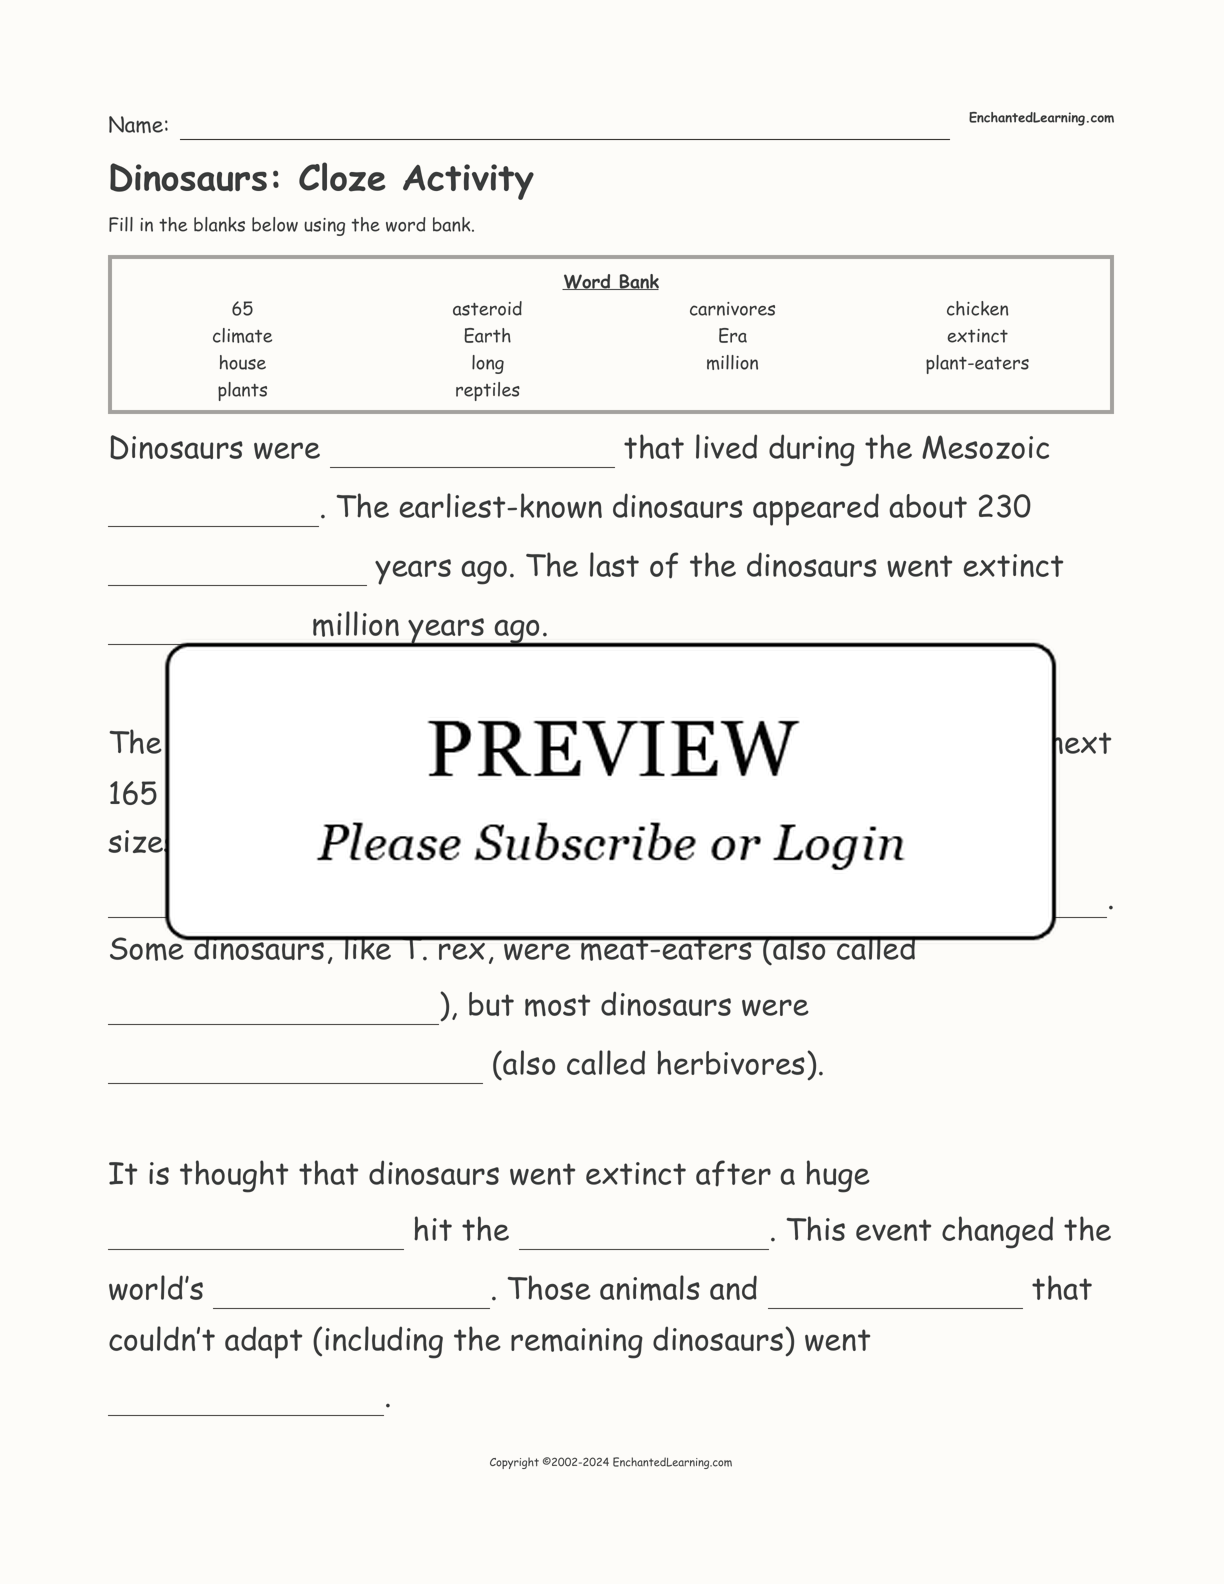 Dinosaurs: Cloze Activity interactive worksheet page 1